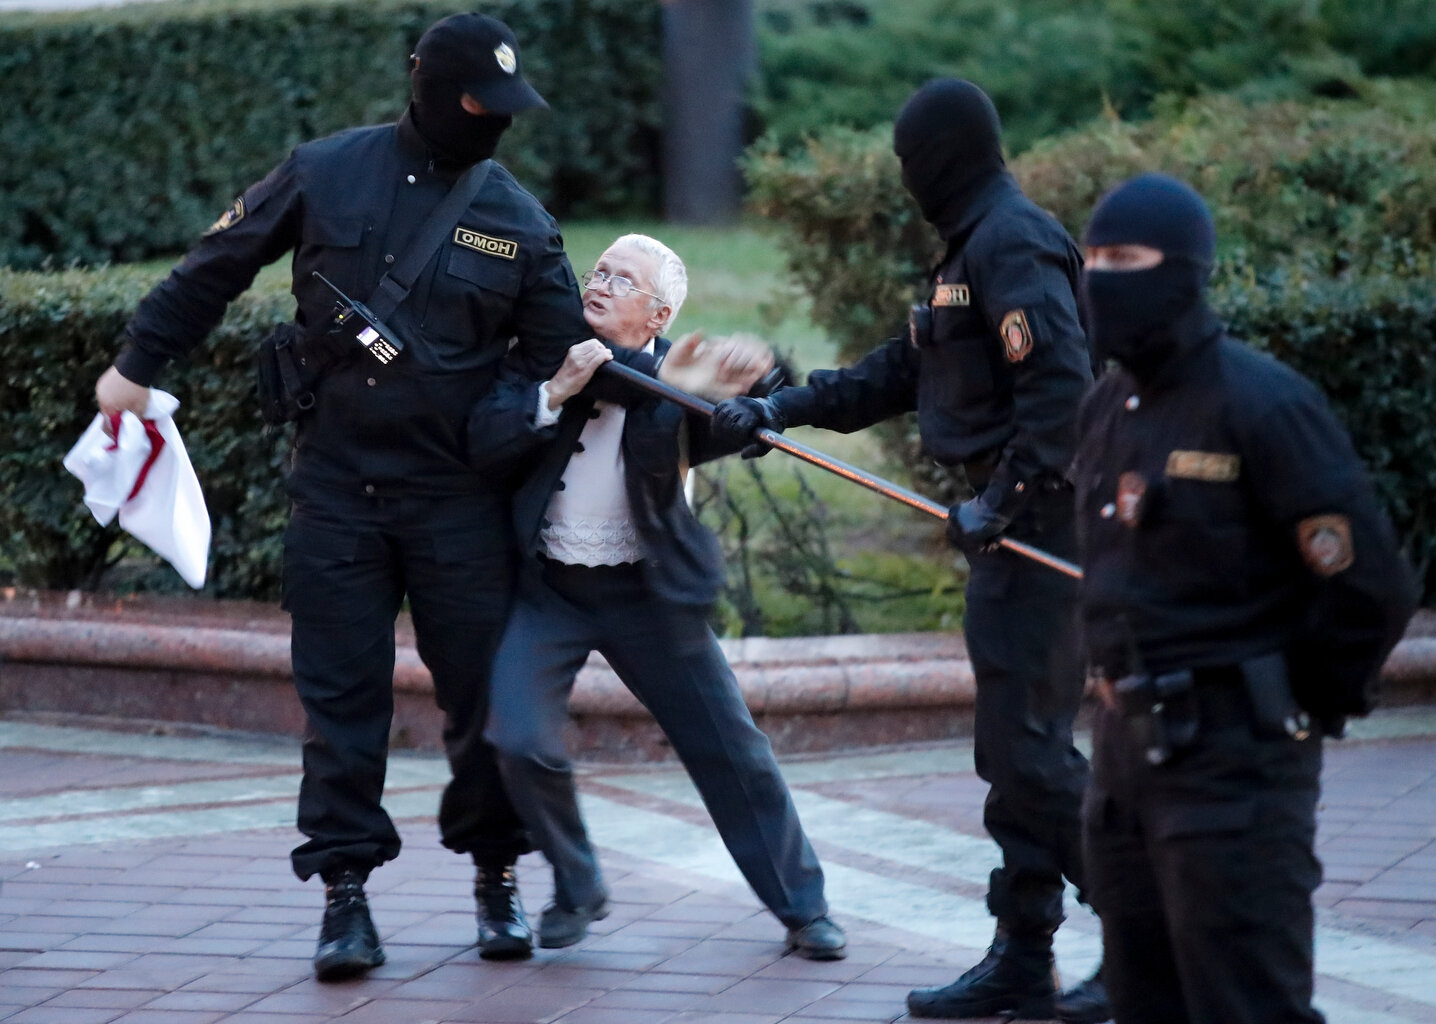  Opposition activist Nina Baginskaya, 73, center, struggles with police during a Belarusian opposition supporters rally at Independence Square in Minsk, Belarus, Wednesday, Aug. 26, 2020. (AP Photo/Dmitri Lovetsky) 